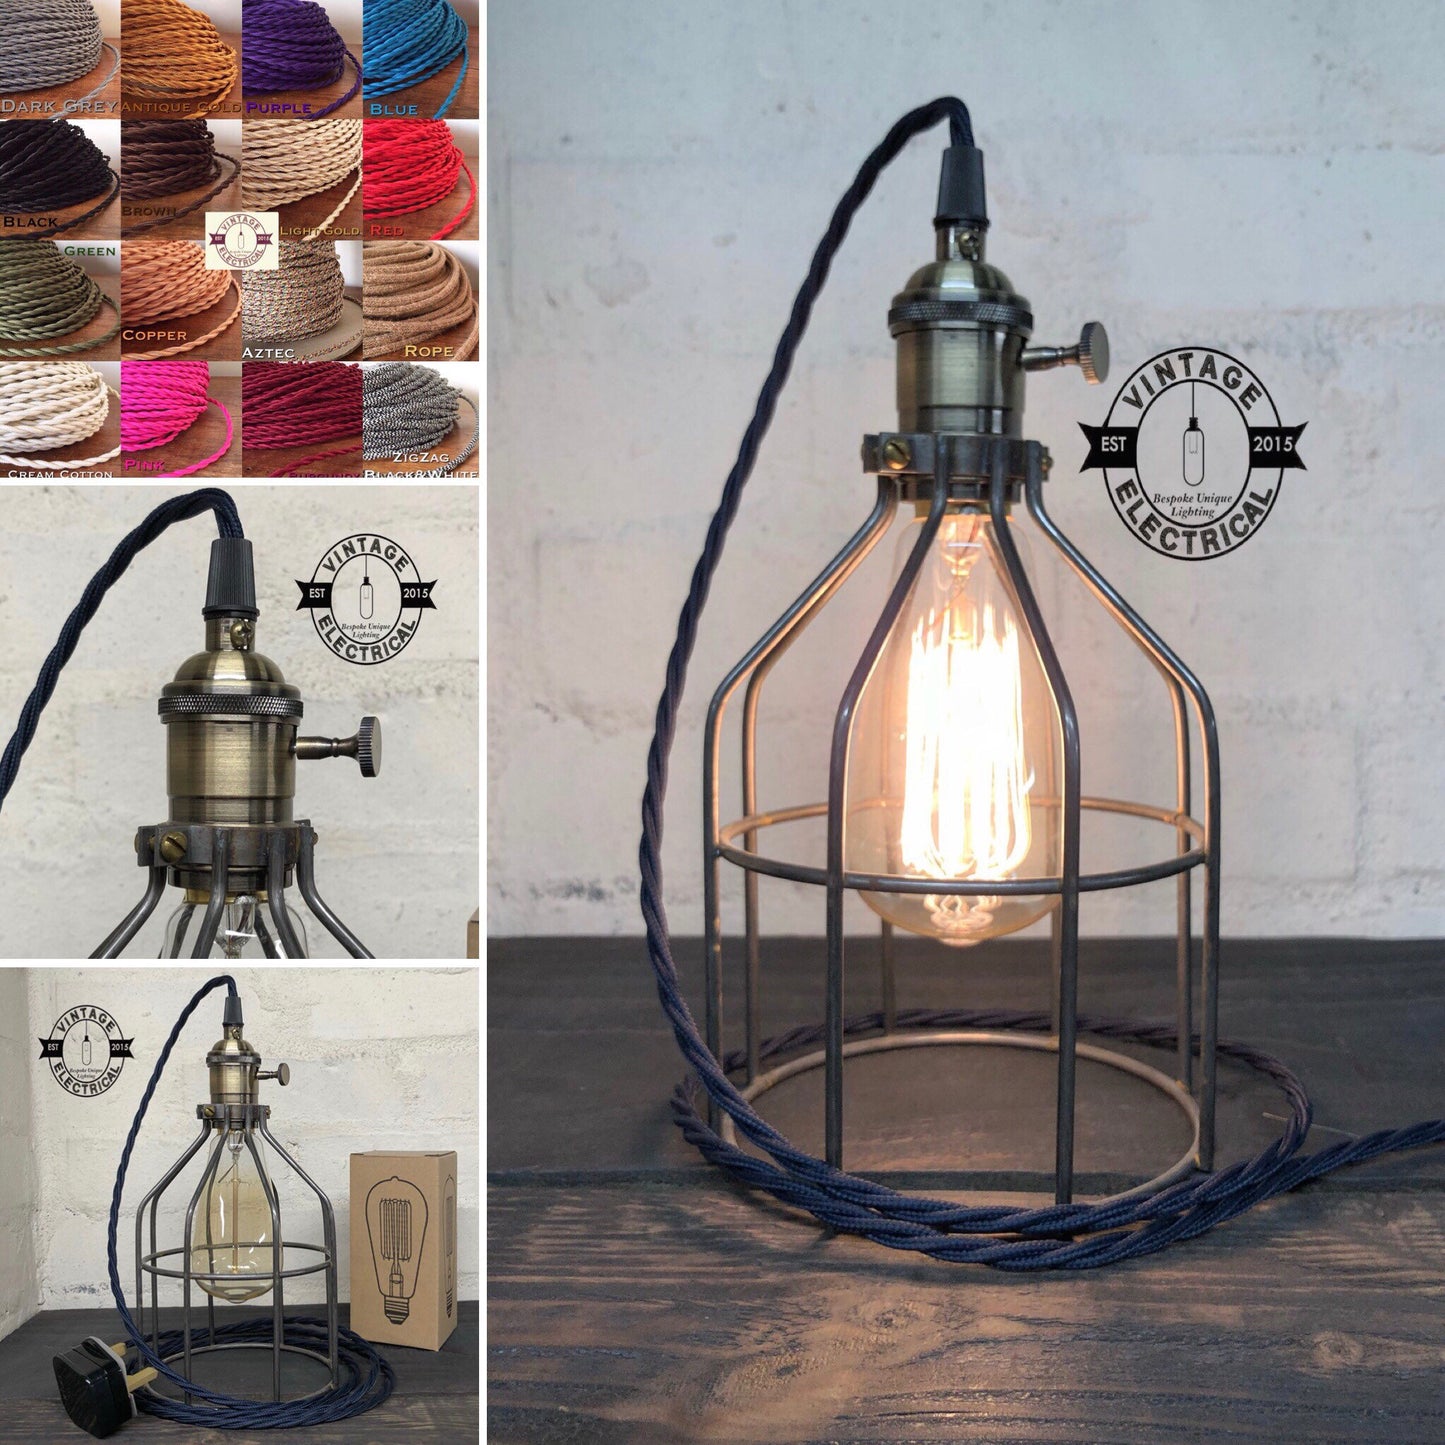 The Caston Cage Raw Steel table light vintage brass style holder with switch fabric 2 metres of cable inspection lamp reading bedside